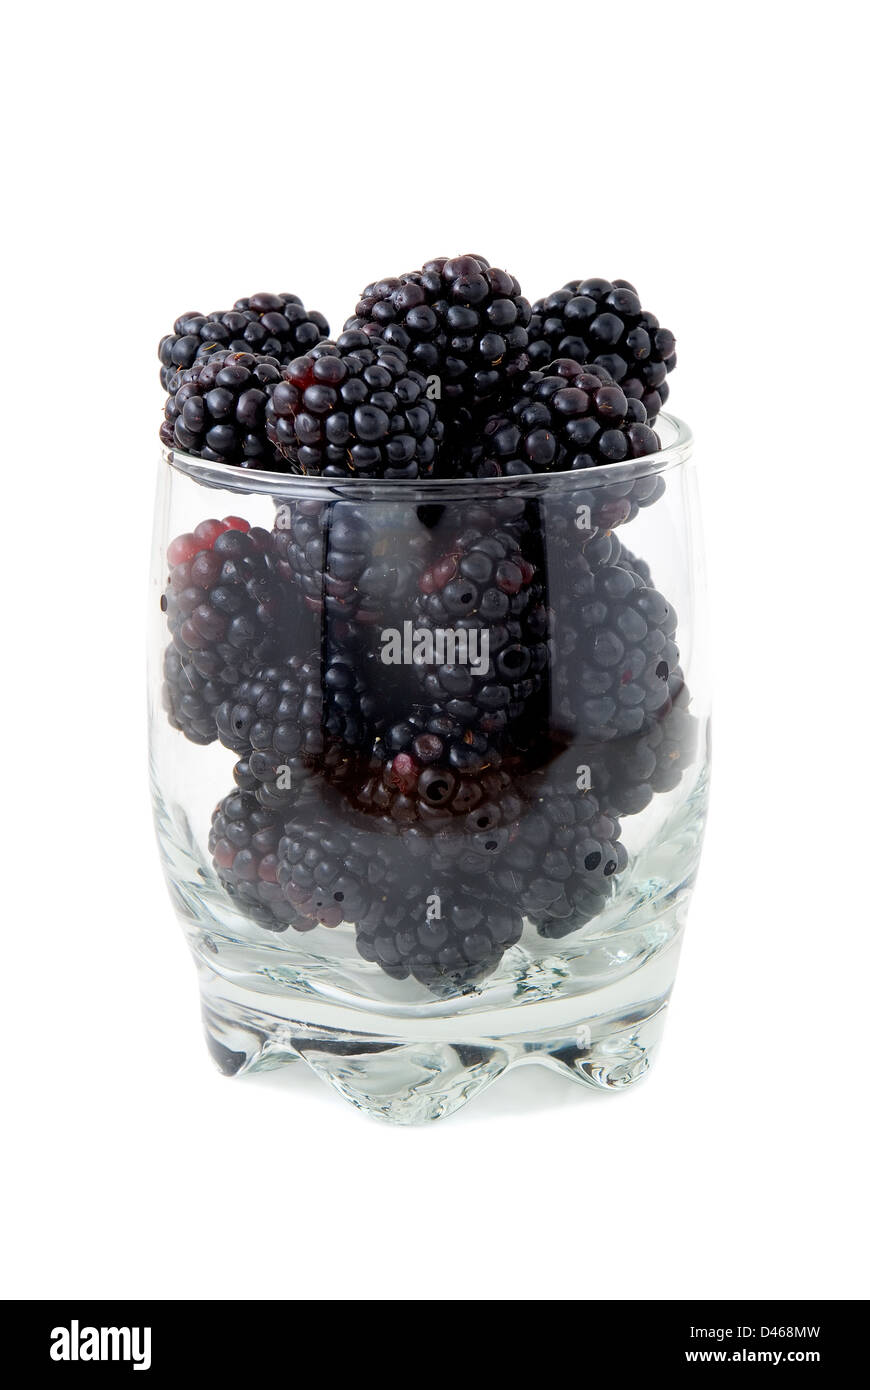 Blackberries in a glass are photographed on a white background Stock Photo